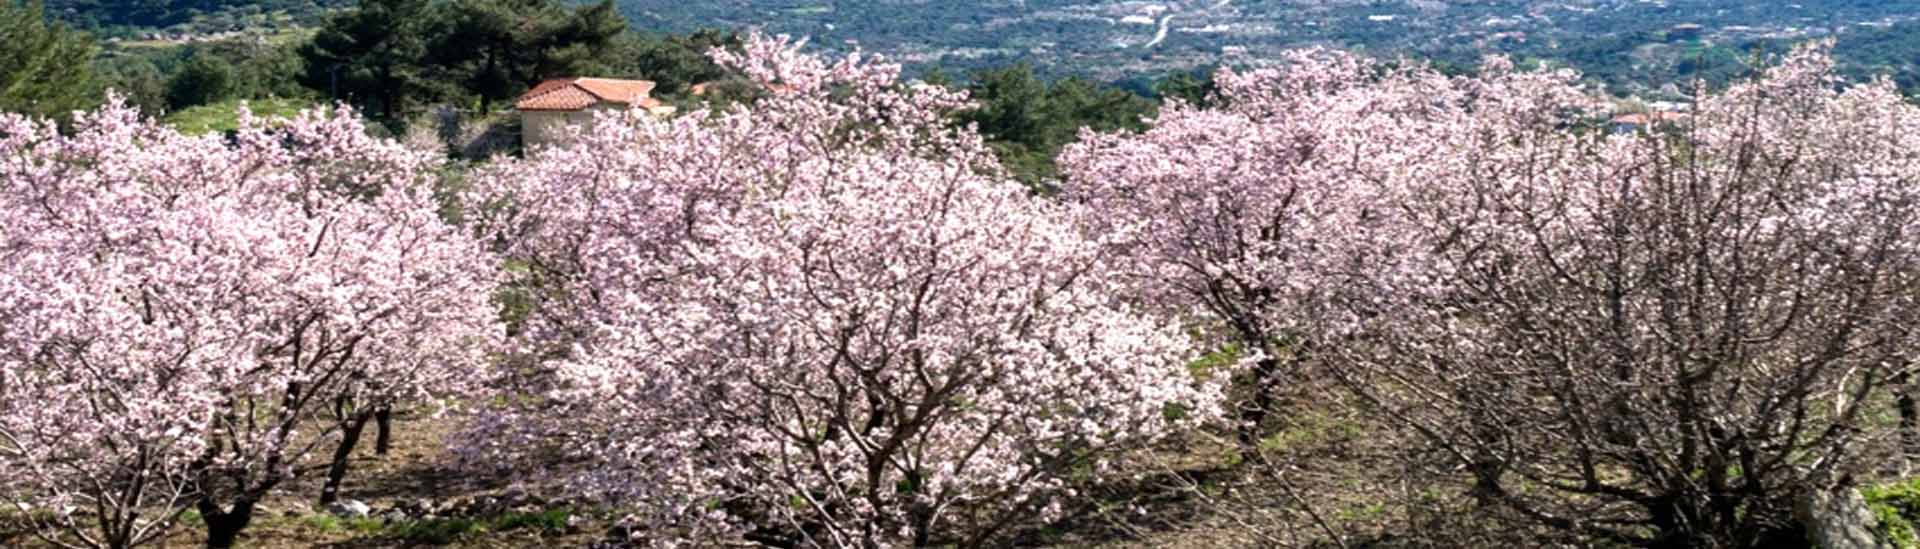 Almond Tree Blossom in the Spring